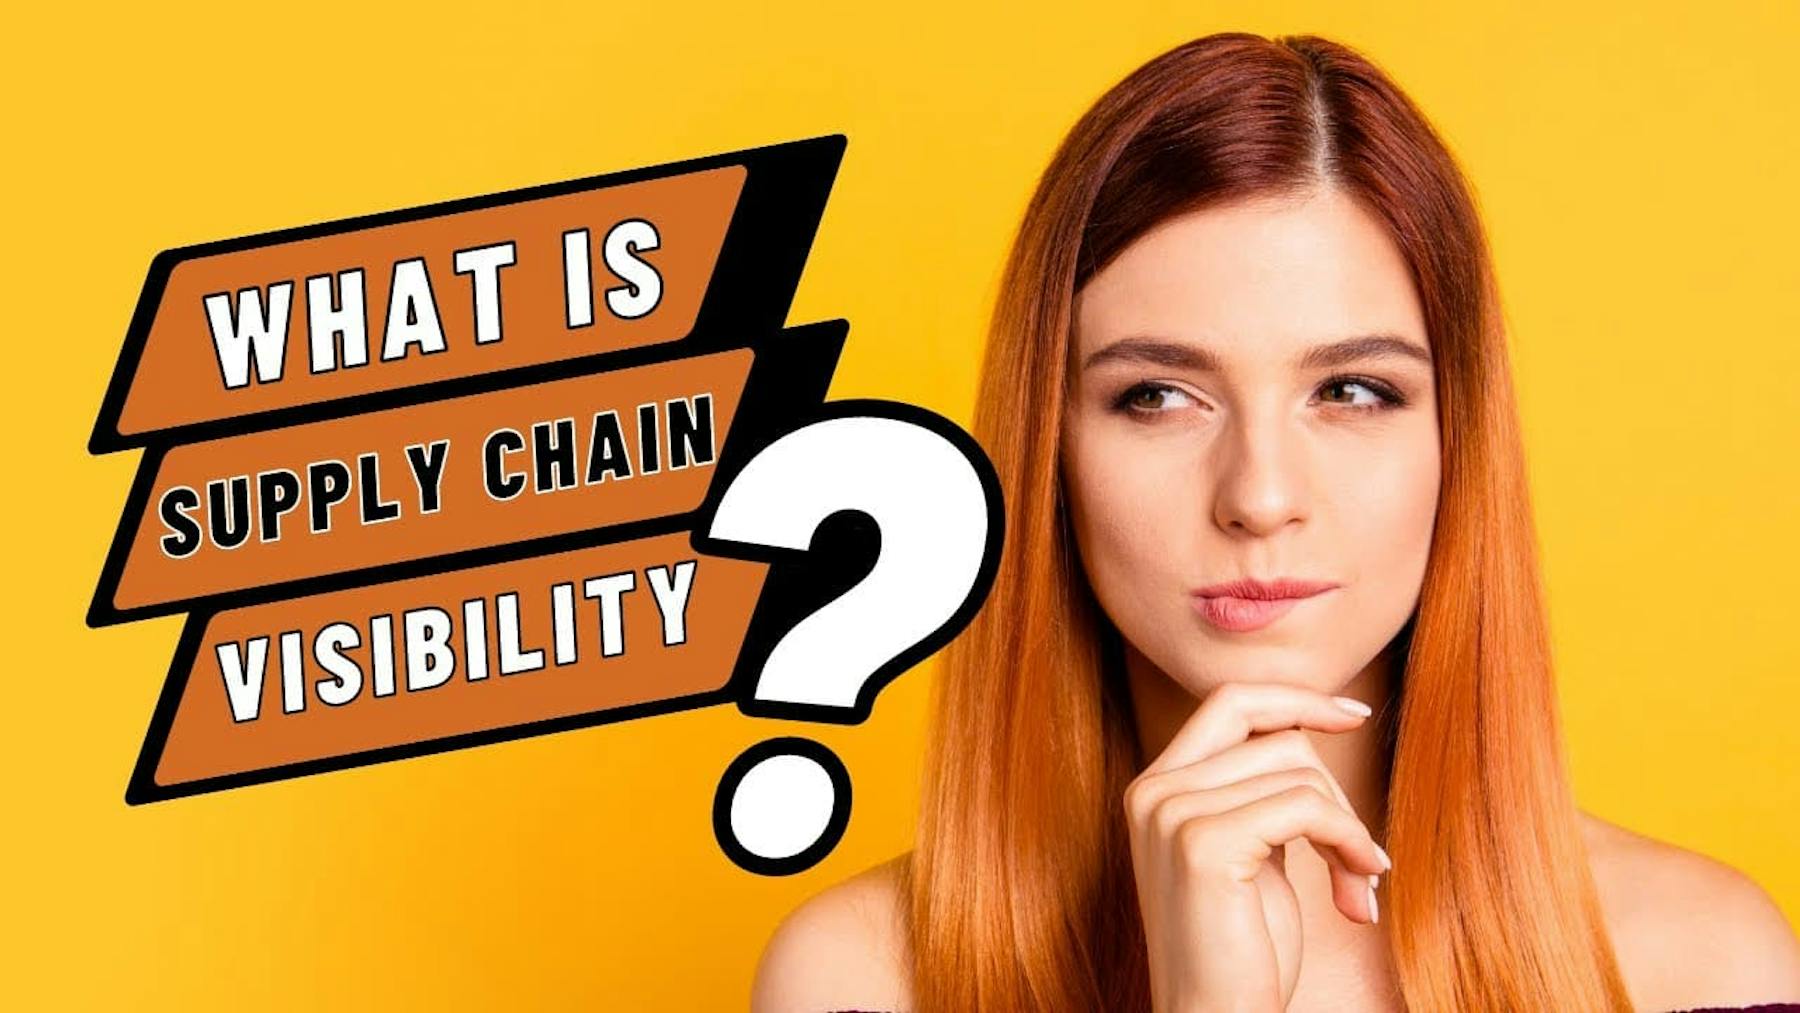 what is supply chain visibility?